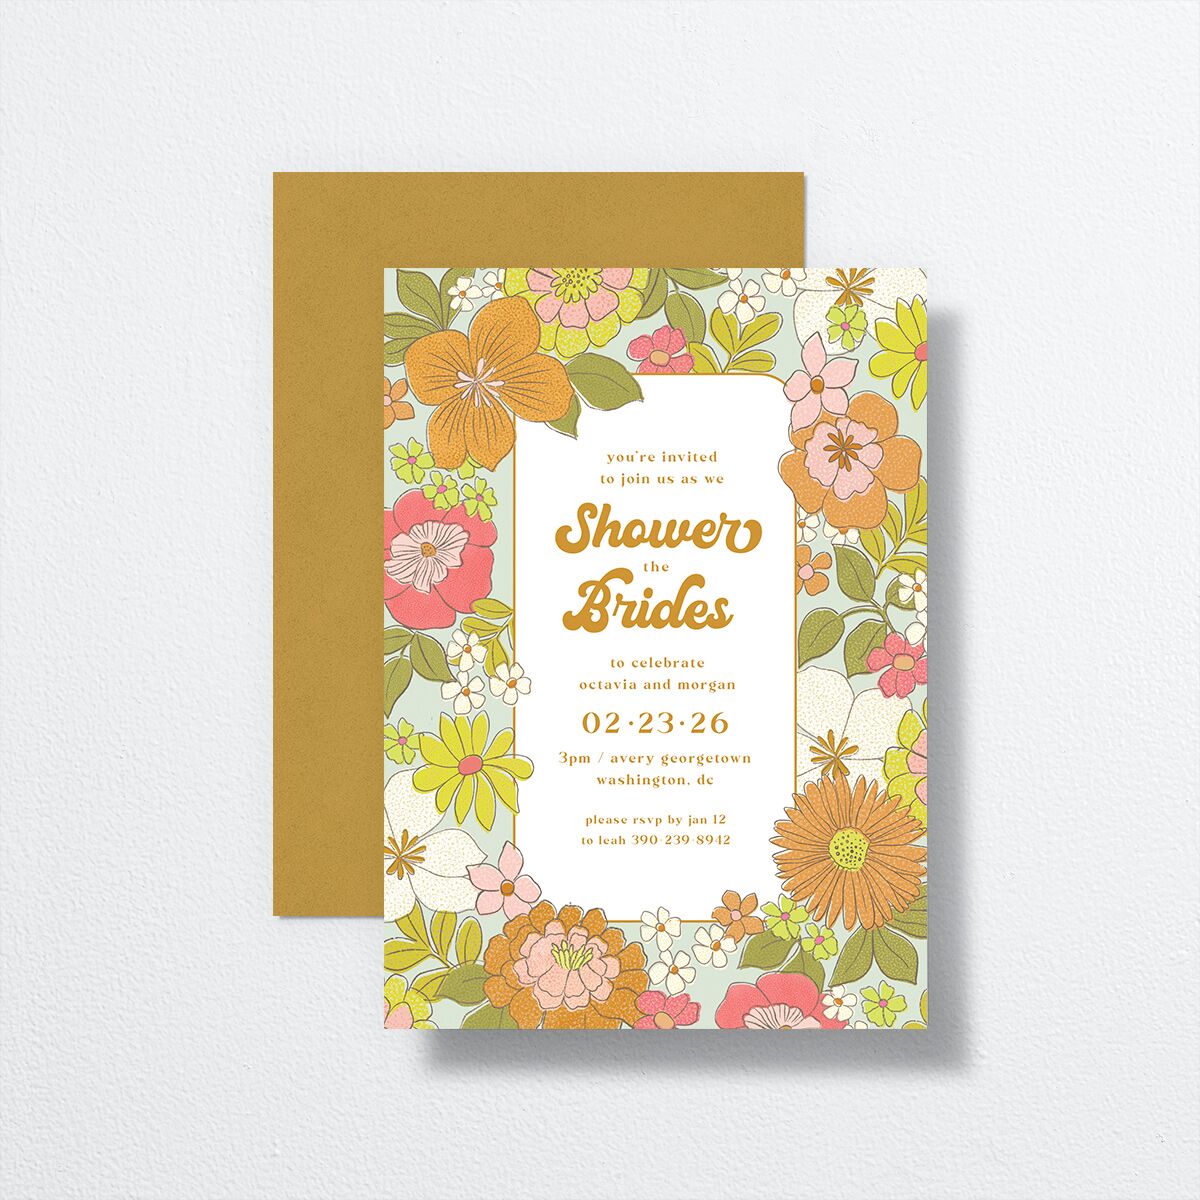 Groovy Blooms Bridal Shower Invitations front-and-back in yellow